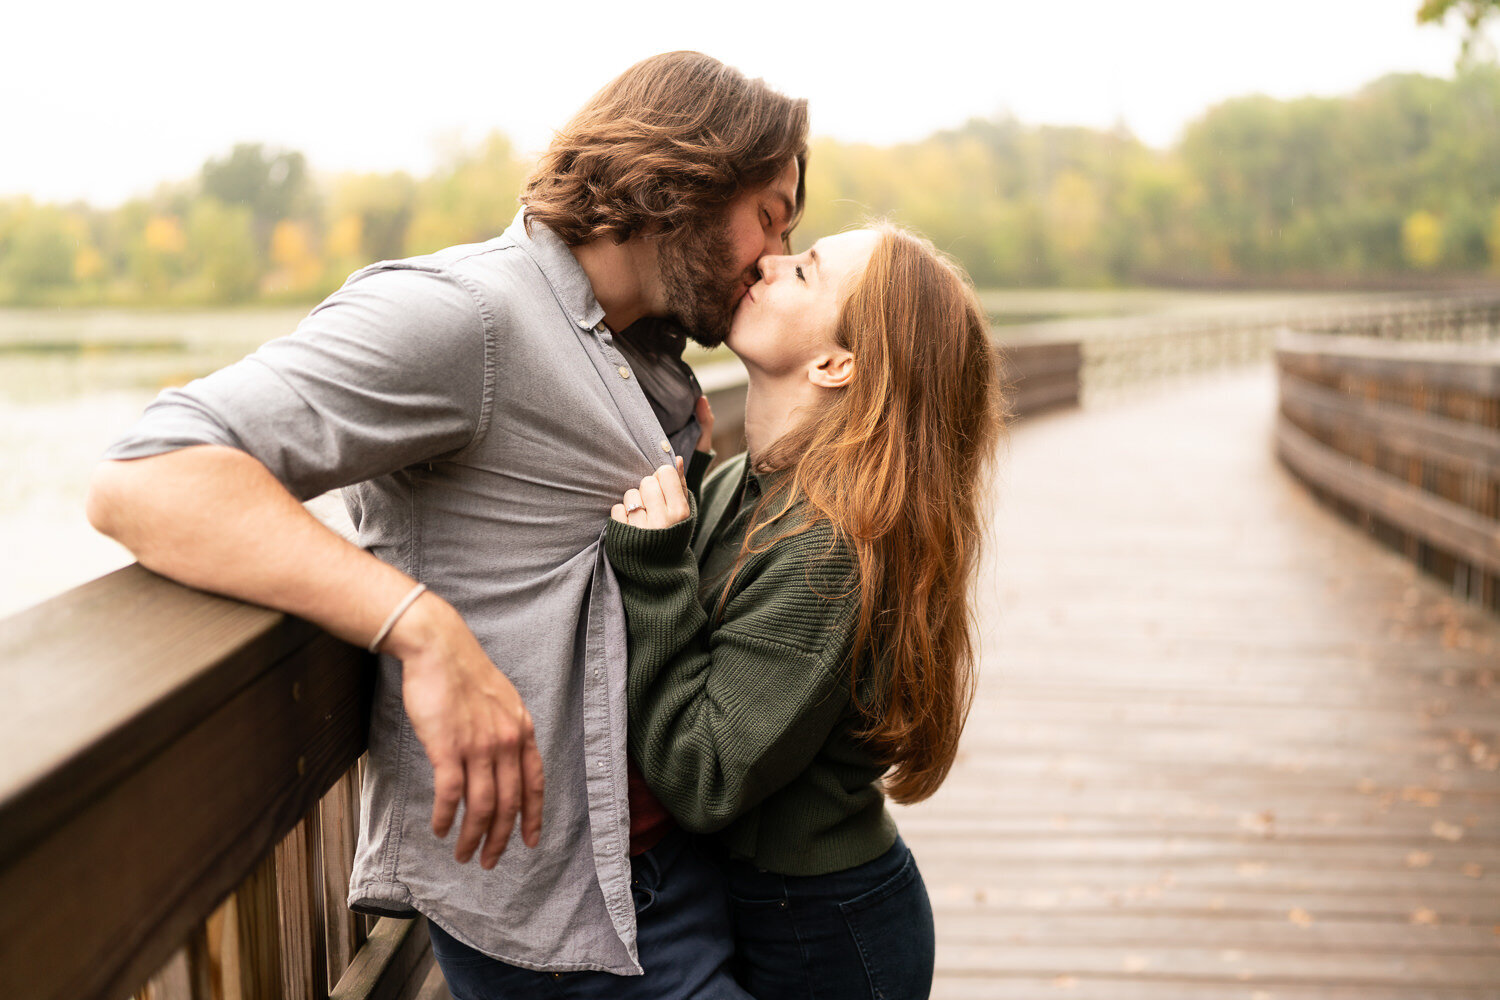 Long haired man and woman kiss on a bridge on a rainy day in Eagan, Minnesota.